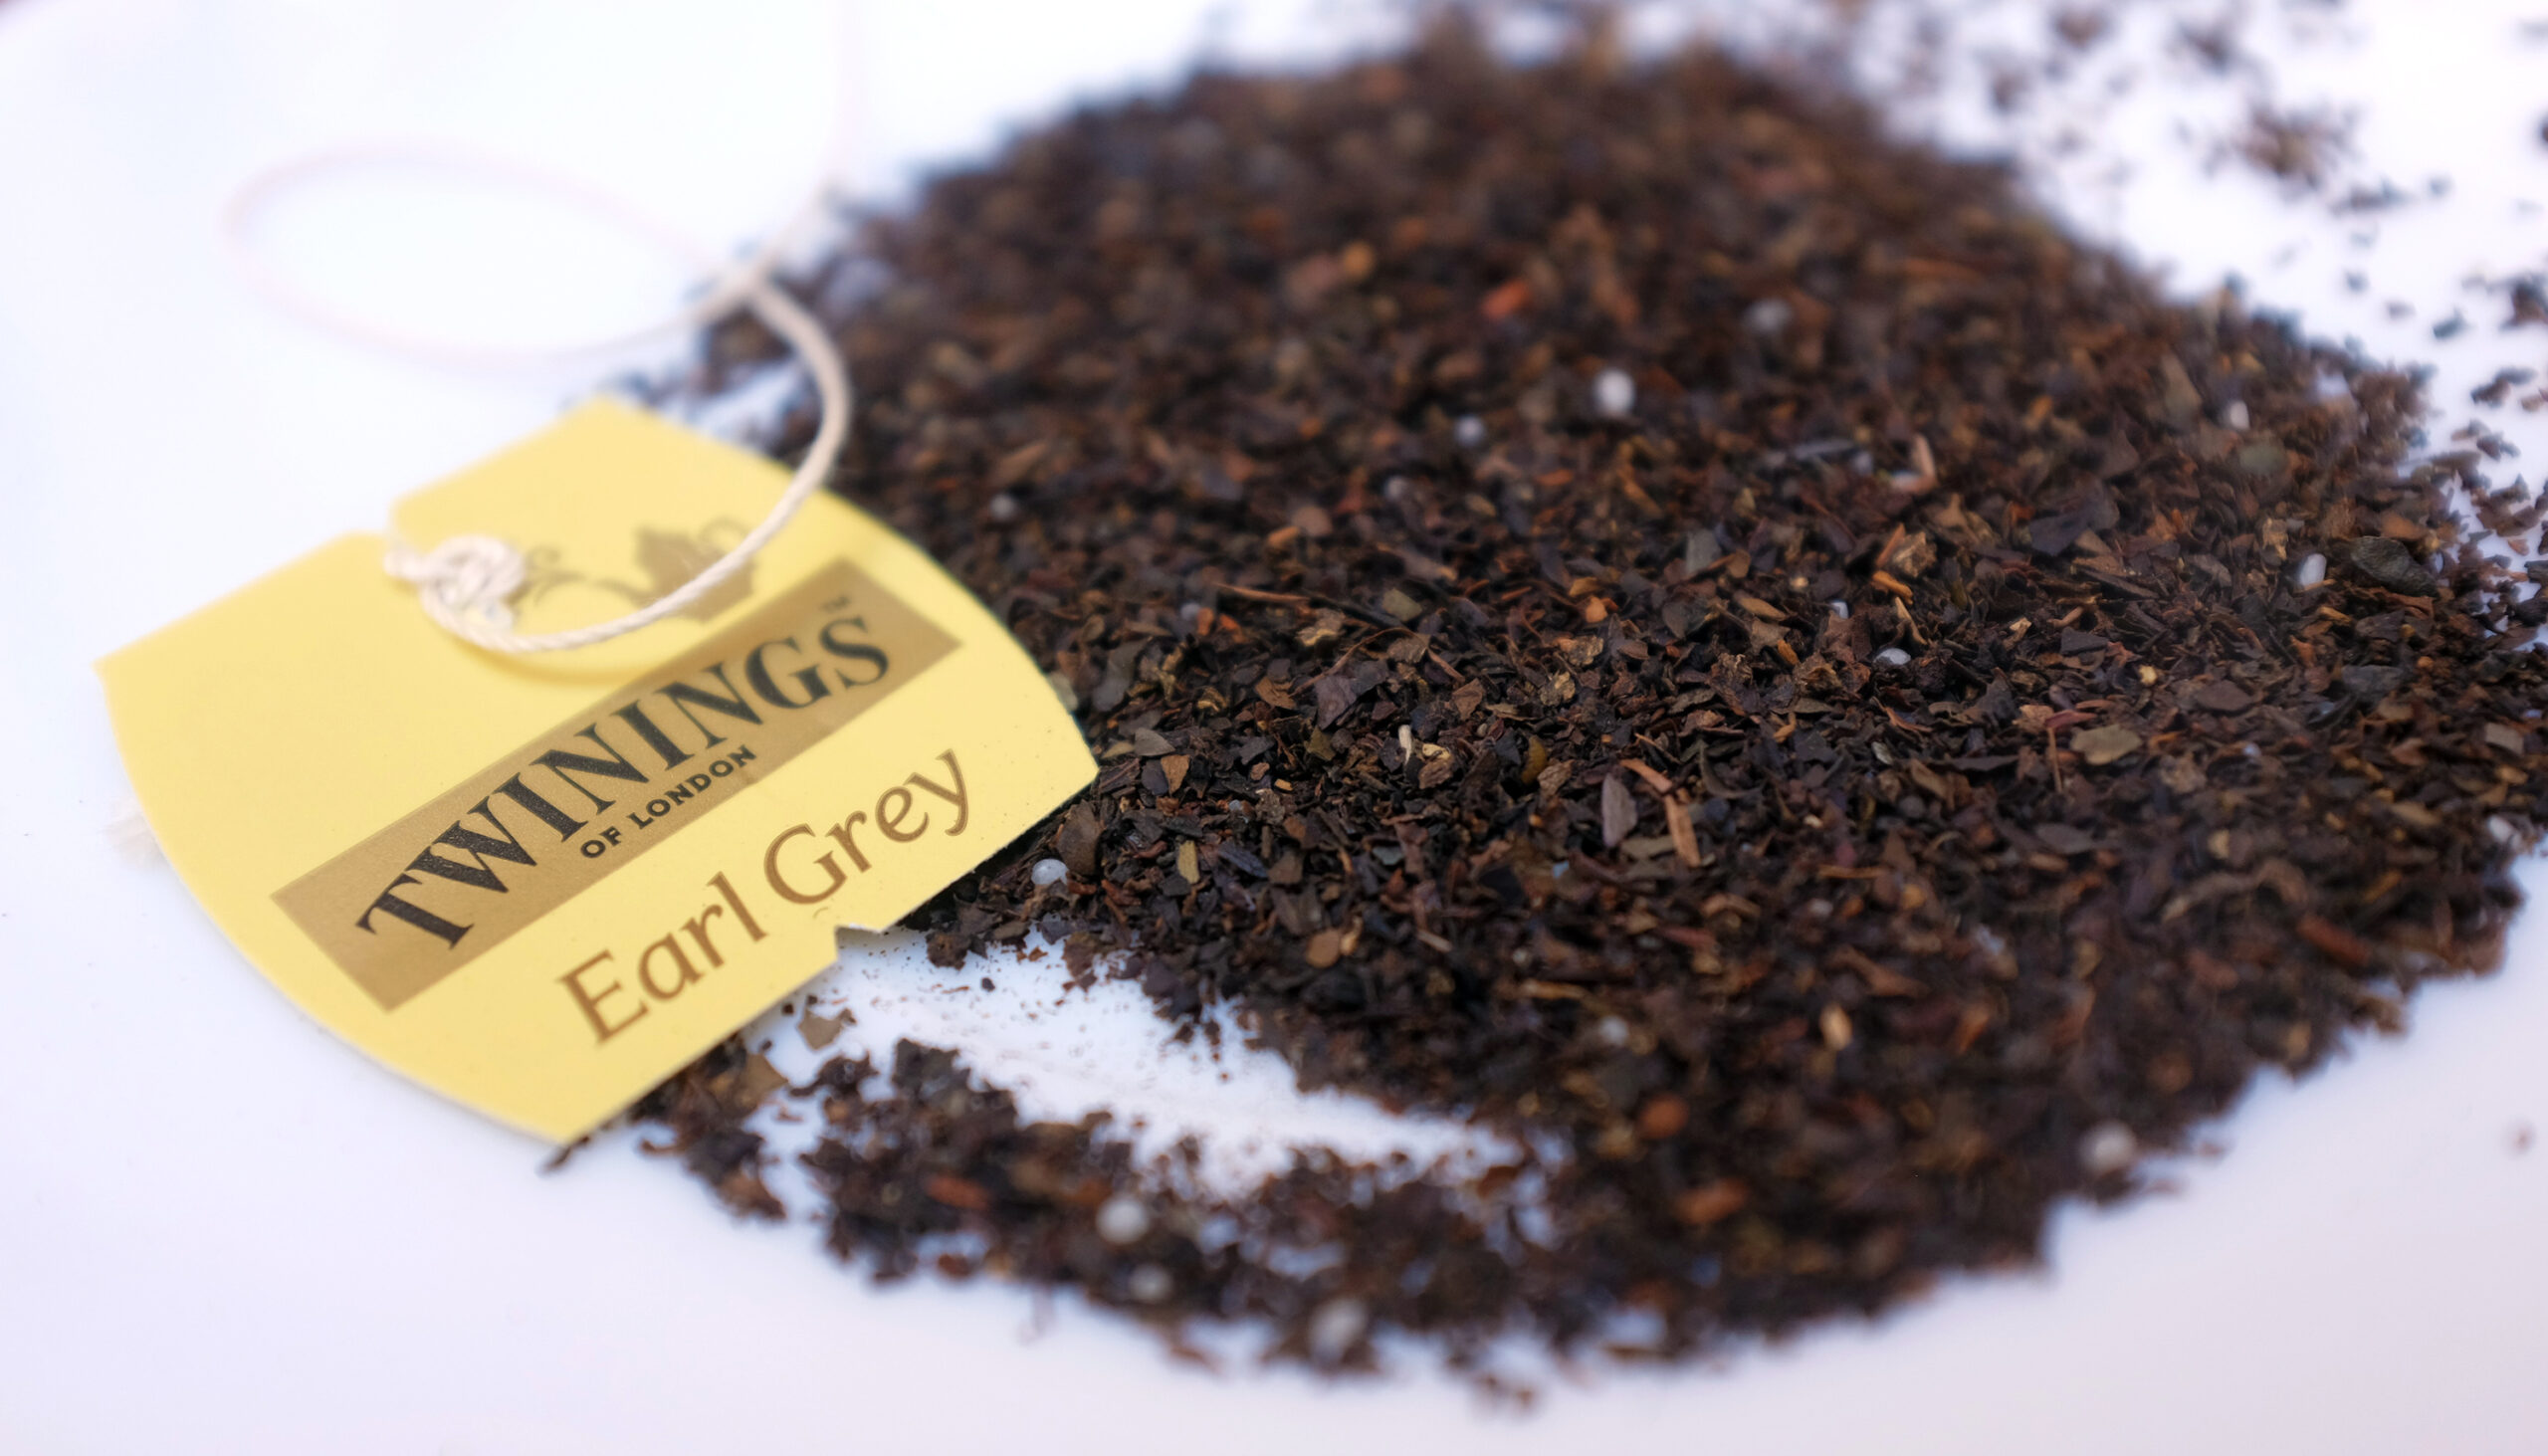 Close-up of the Twinings of London Earl Grey (International Blend) bagged tea leaves.